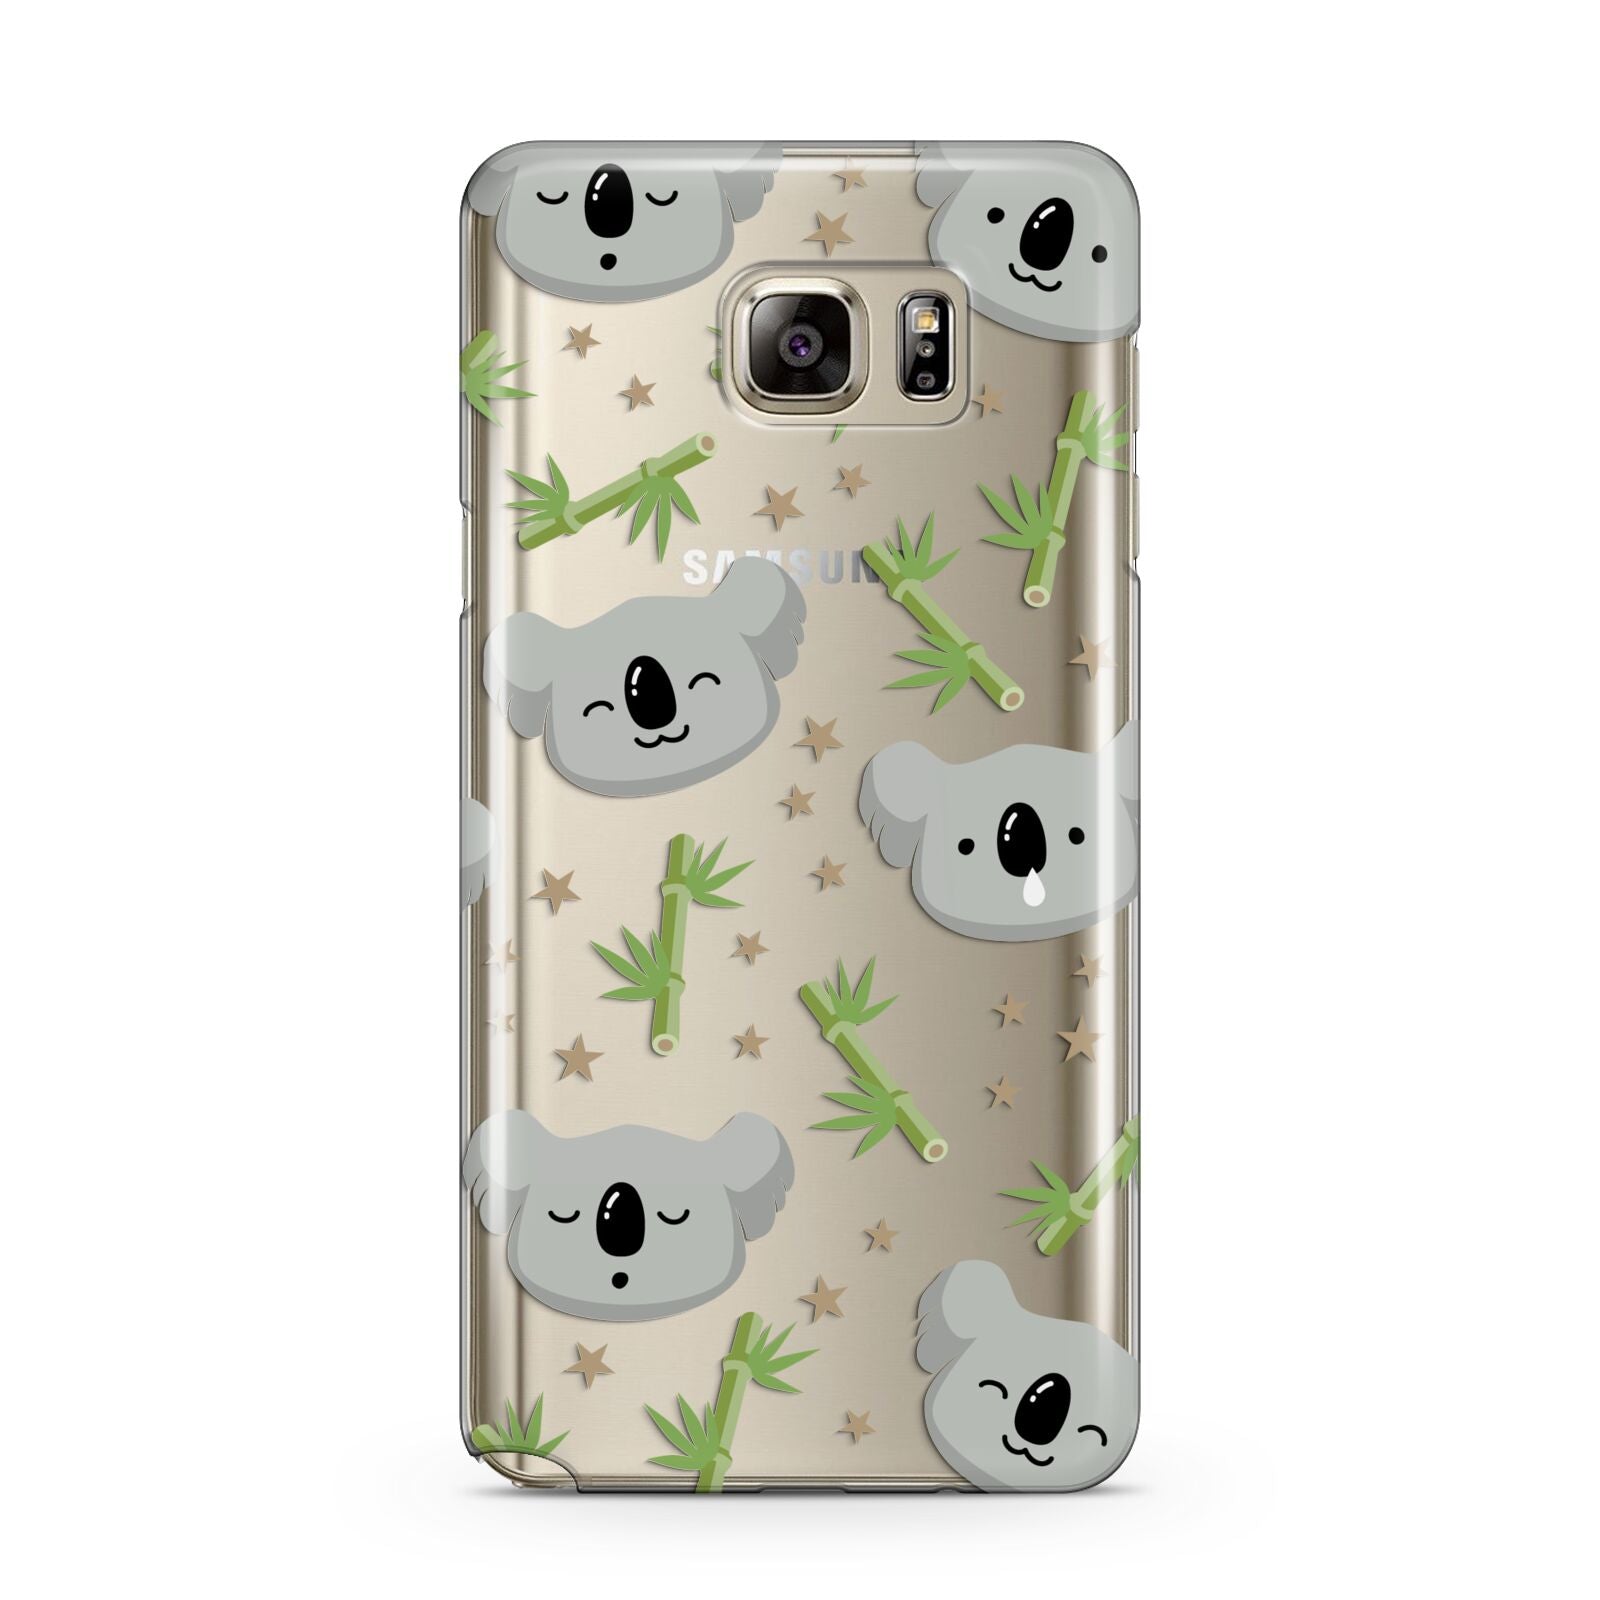 Koala Faces with Transparent Background Samsung Galaxy Note 5 Case